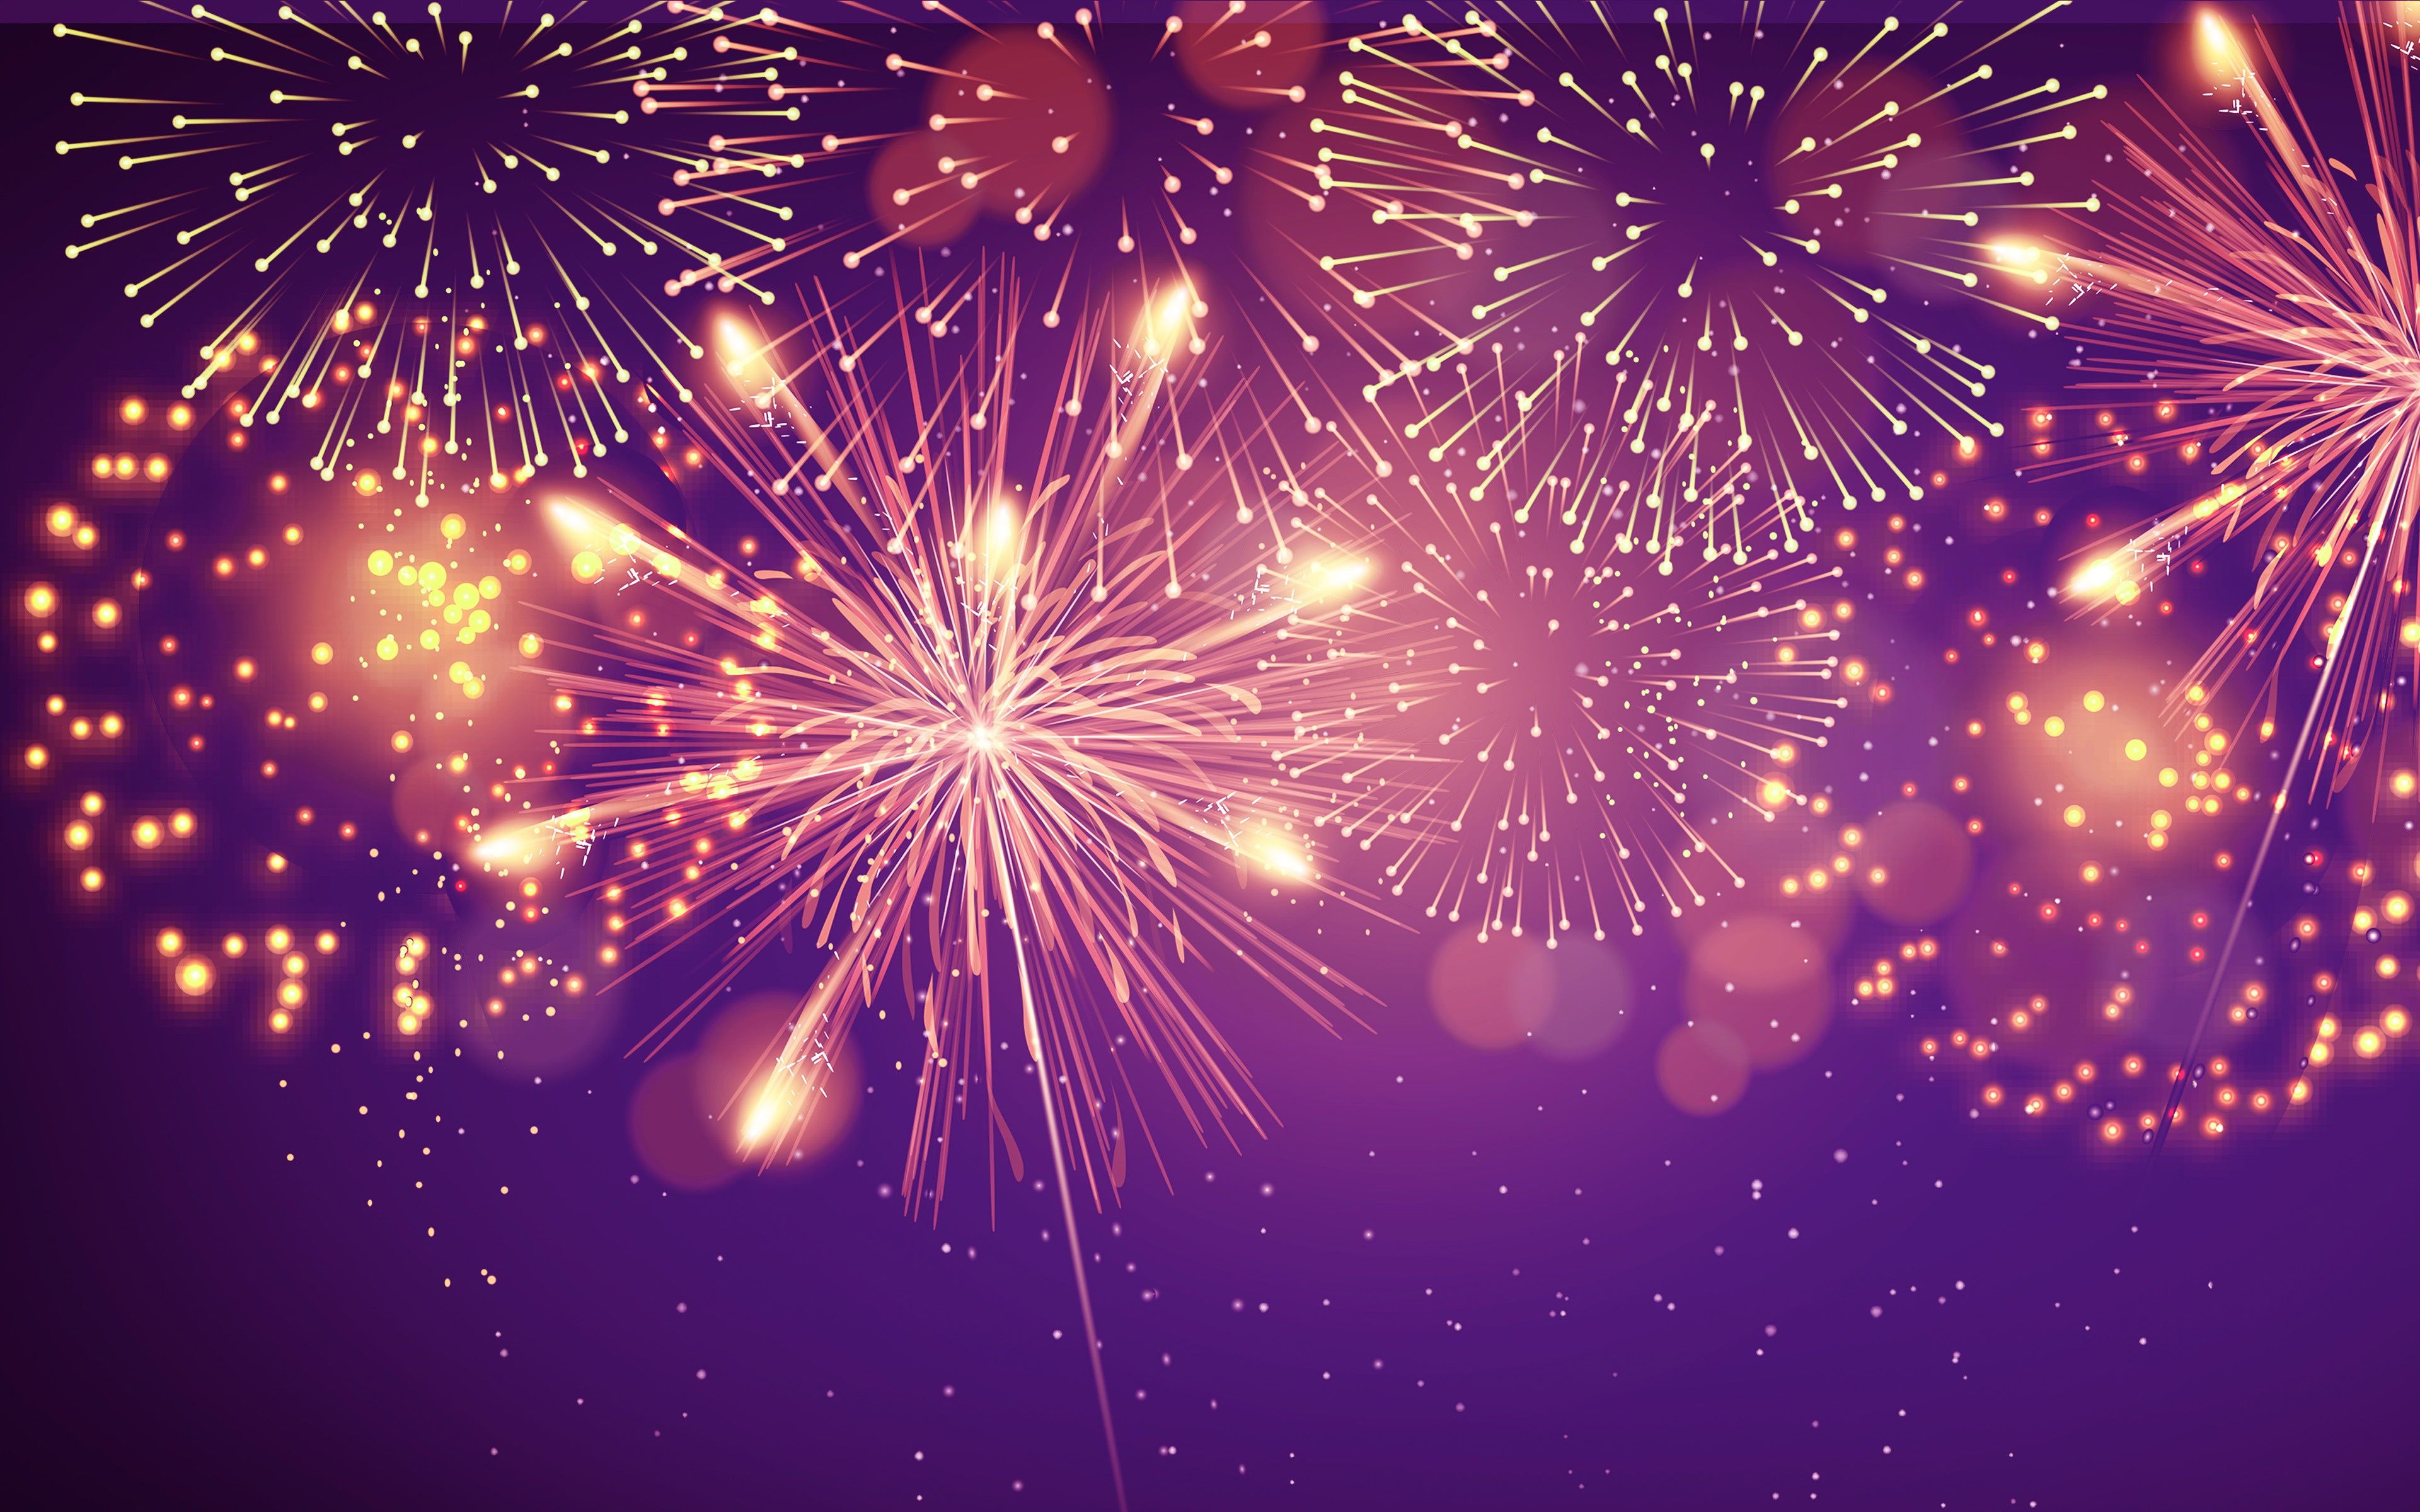 Download wallpapers Fireworks on a purple background, Backgrounds with fireworks, New Year, Christmas, purple Christmas background, Fireworks for desktop with resolution 3840x2400. High Quality HD pictures wallpapers